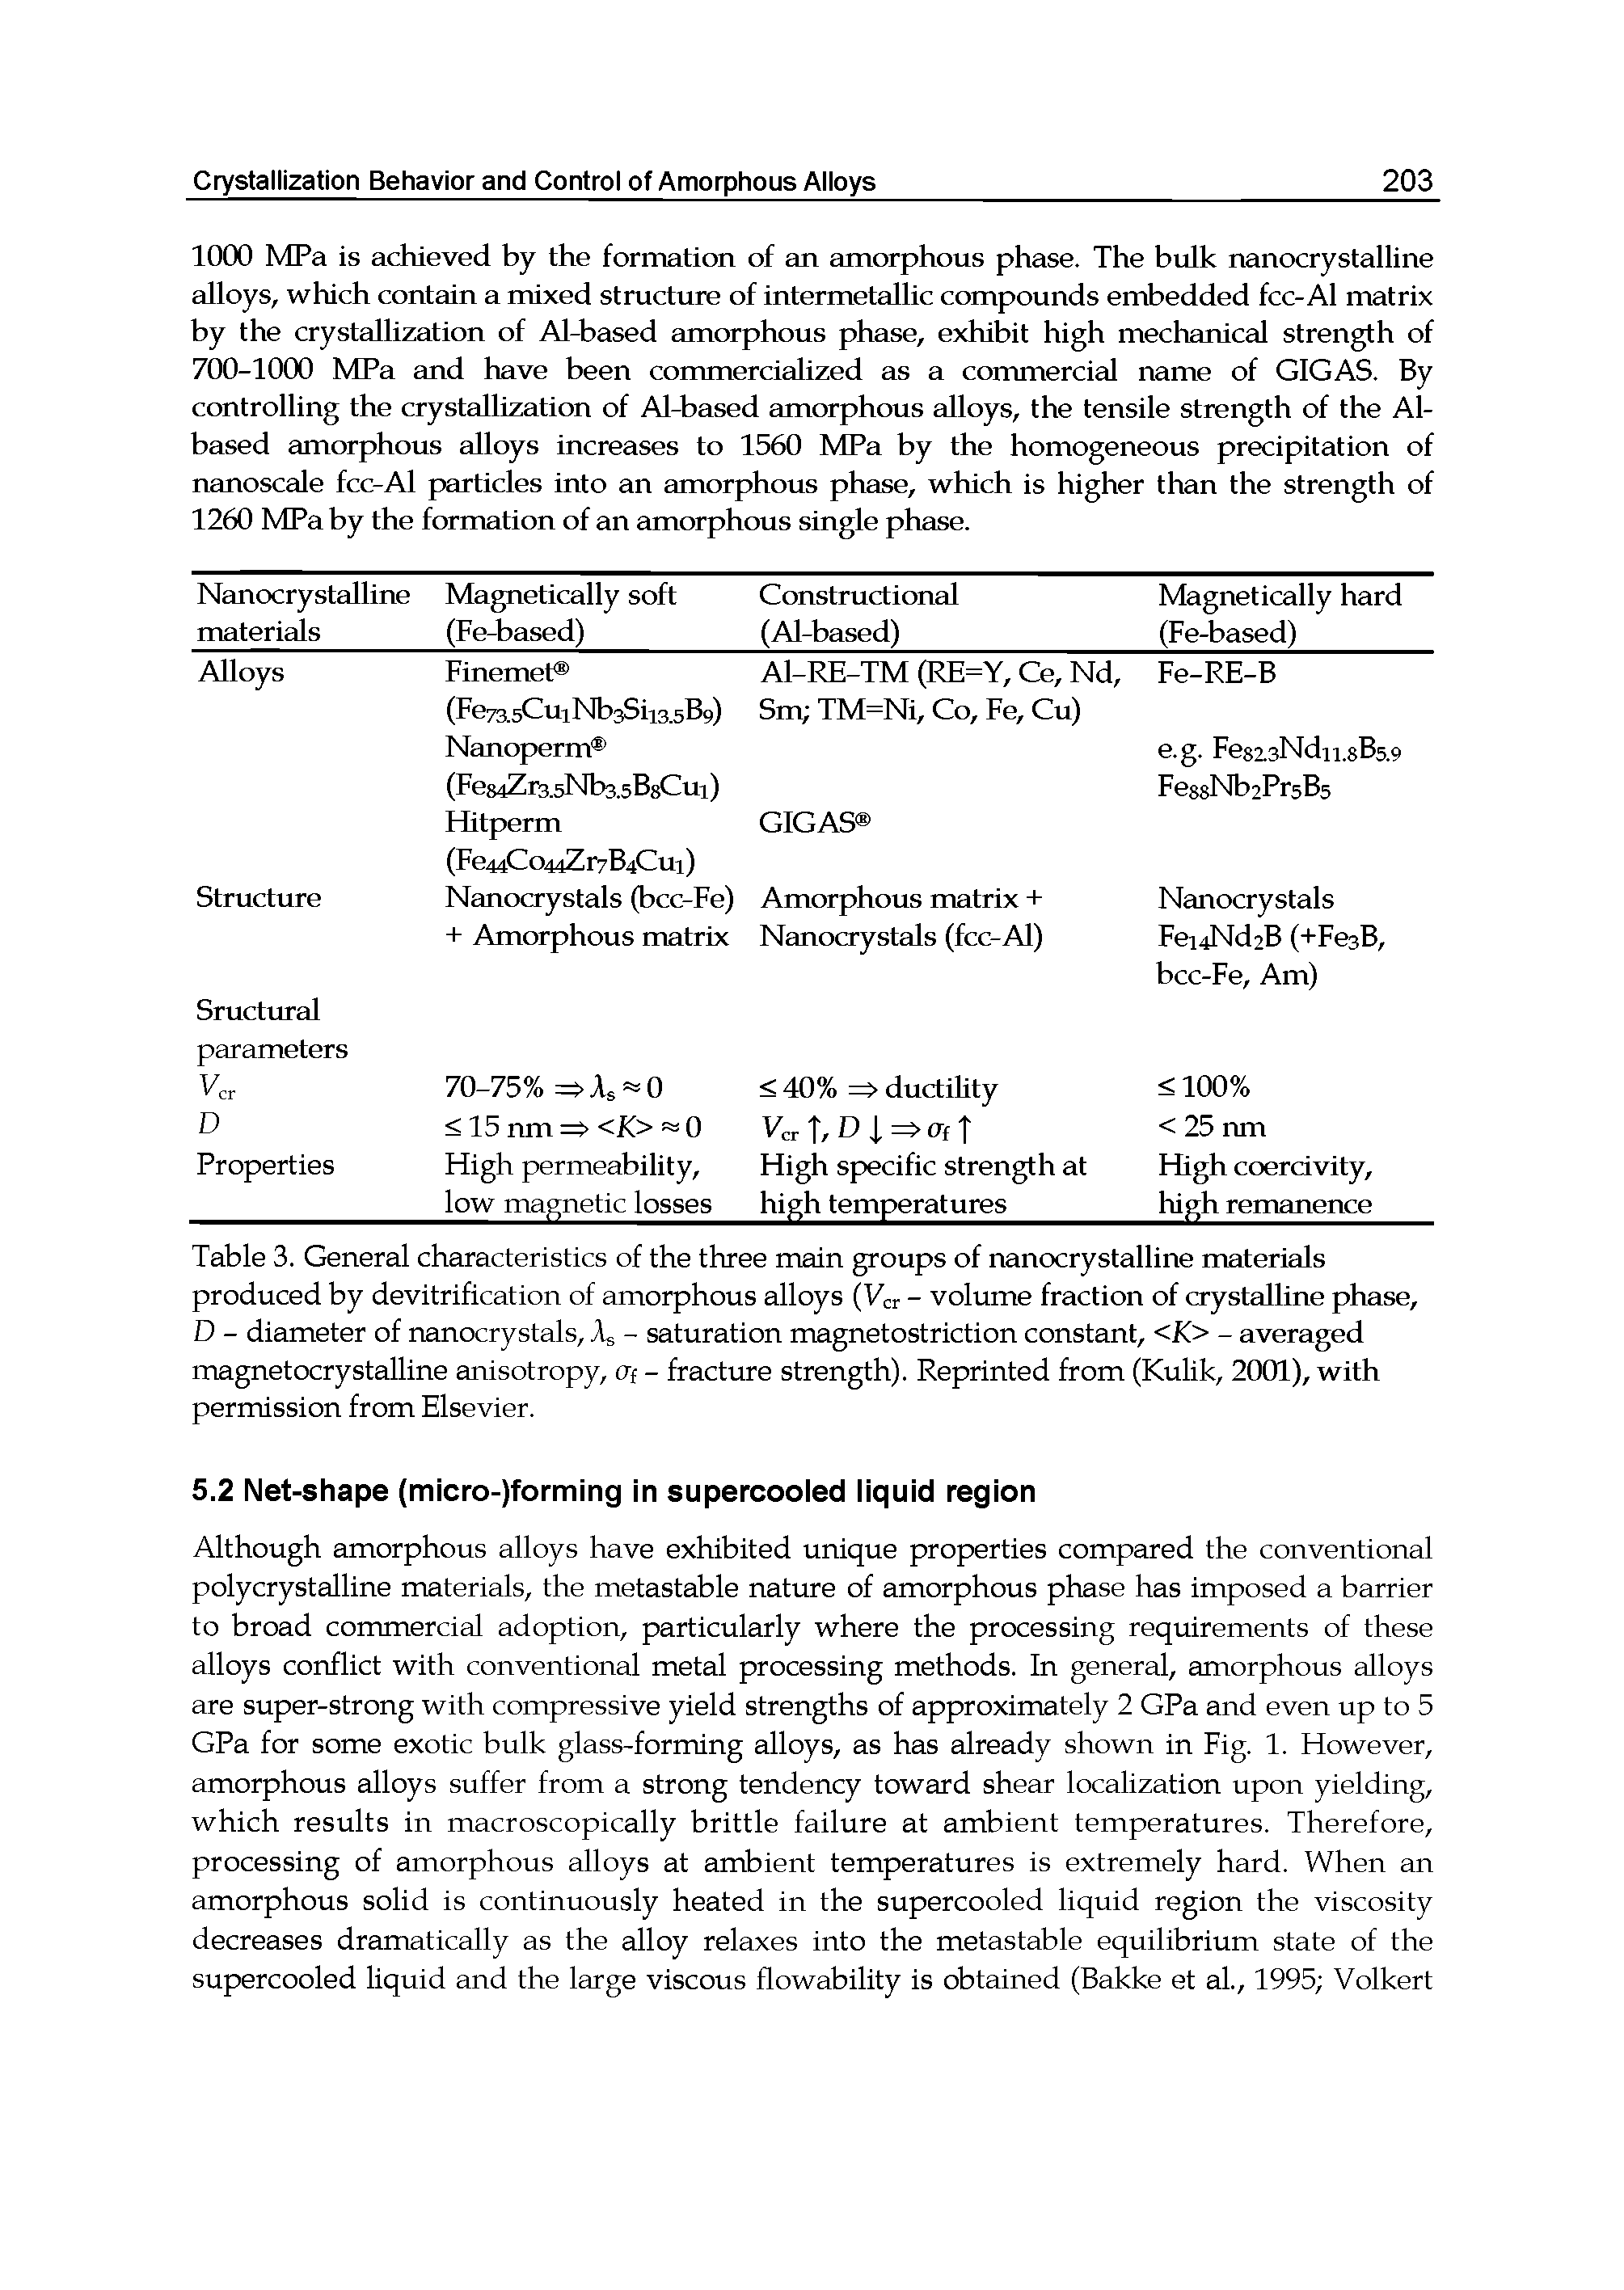 Table 3. General characteristics of the three main groups of nanocrystalline materials produced by devitrification of amorphous alloys (Vcr - volume fraction of crystalline phase, D - diameter of nanocrystals, A - saturation magnetostriction constant, <K> - averaged magnetocrystalline anisotropy, fff - fracture strength). Reprinted from (Kuhk, 2001), with permission from Elsevier.